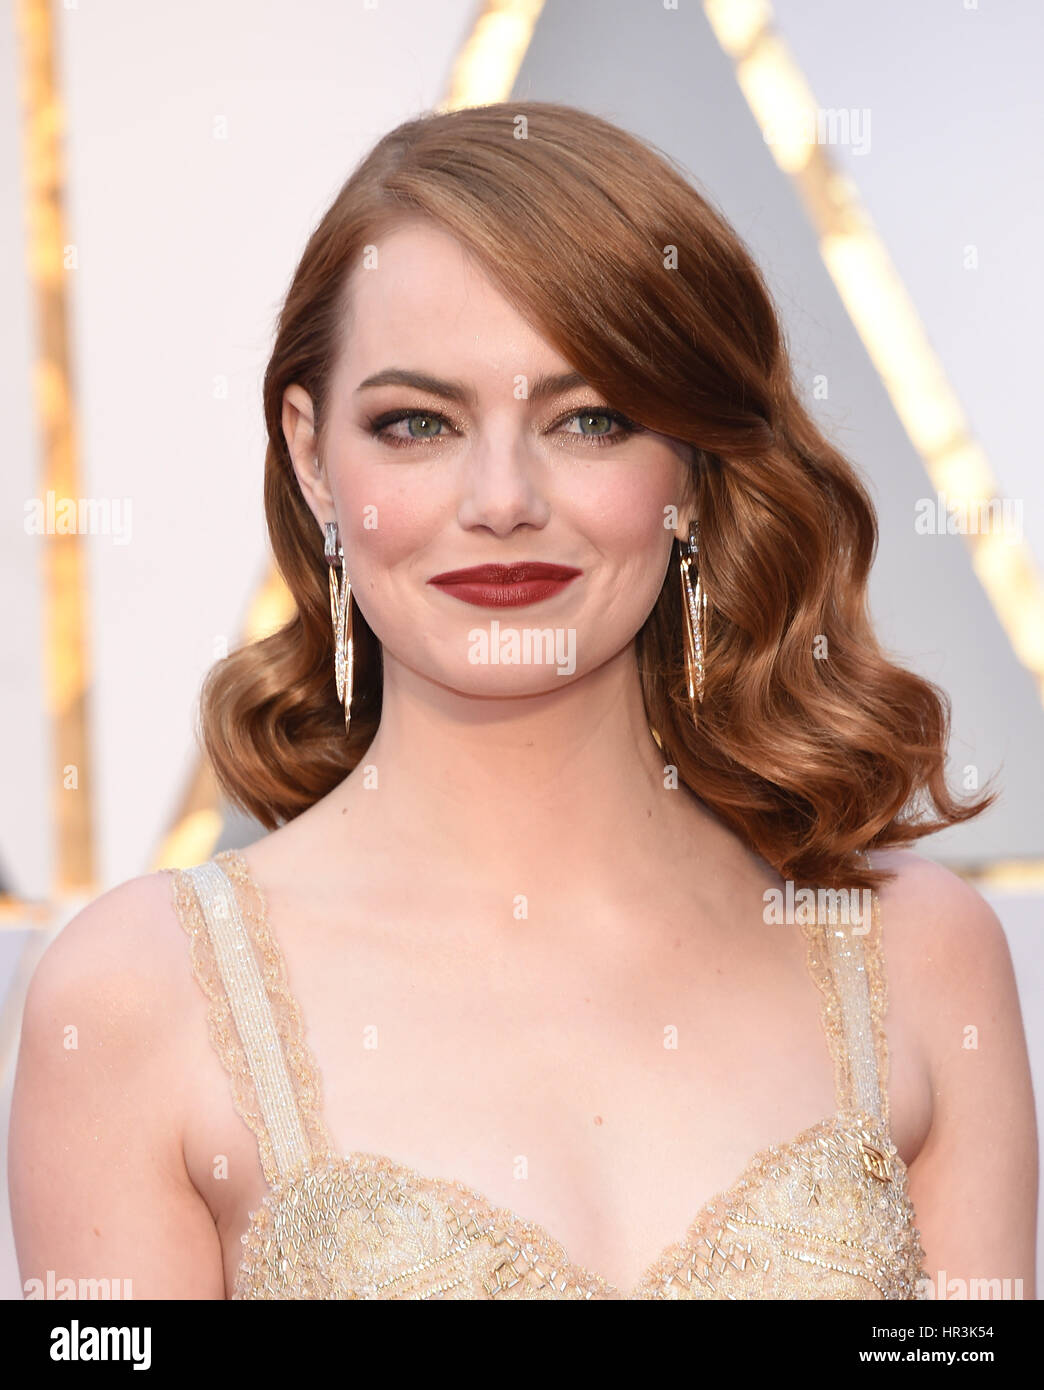 Emma Stone goes green on the red carpet - CBS News